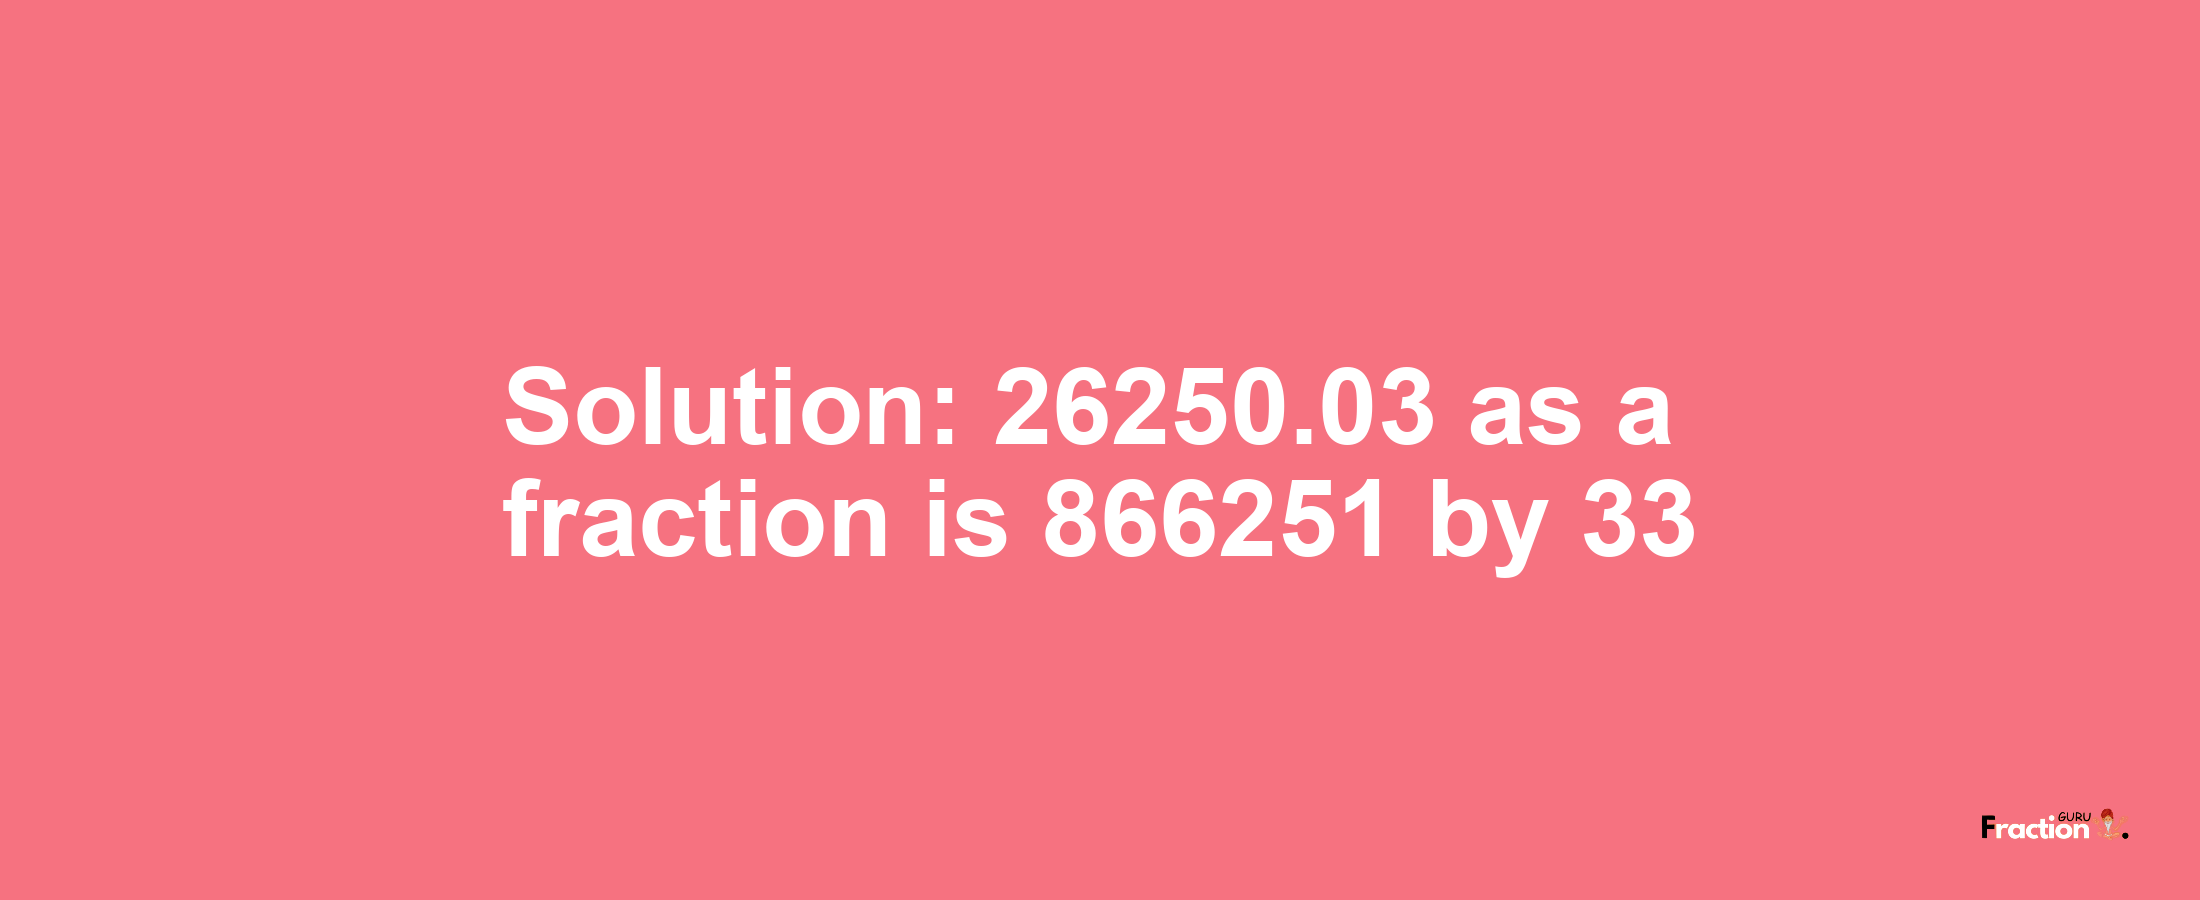 Solution:26250.03 as a fraction is 866251/33